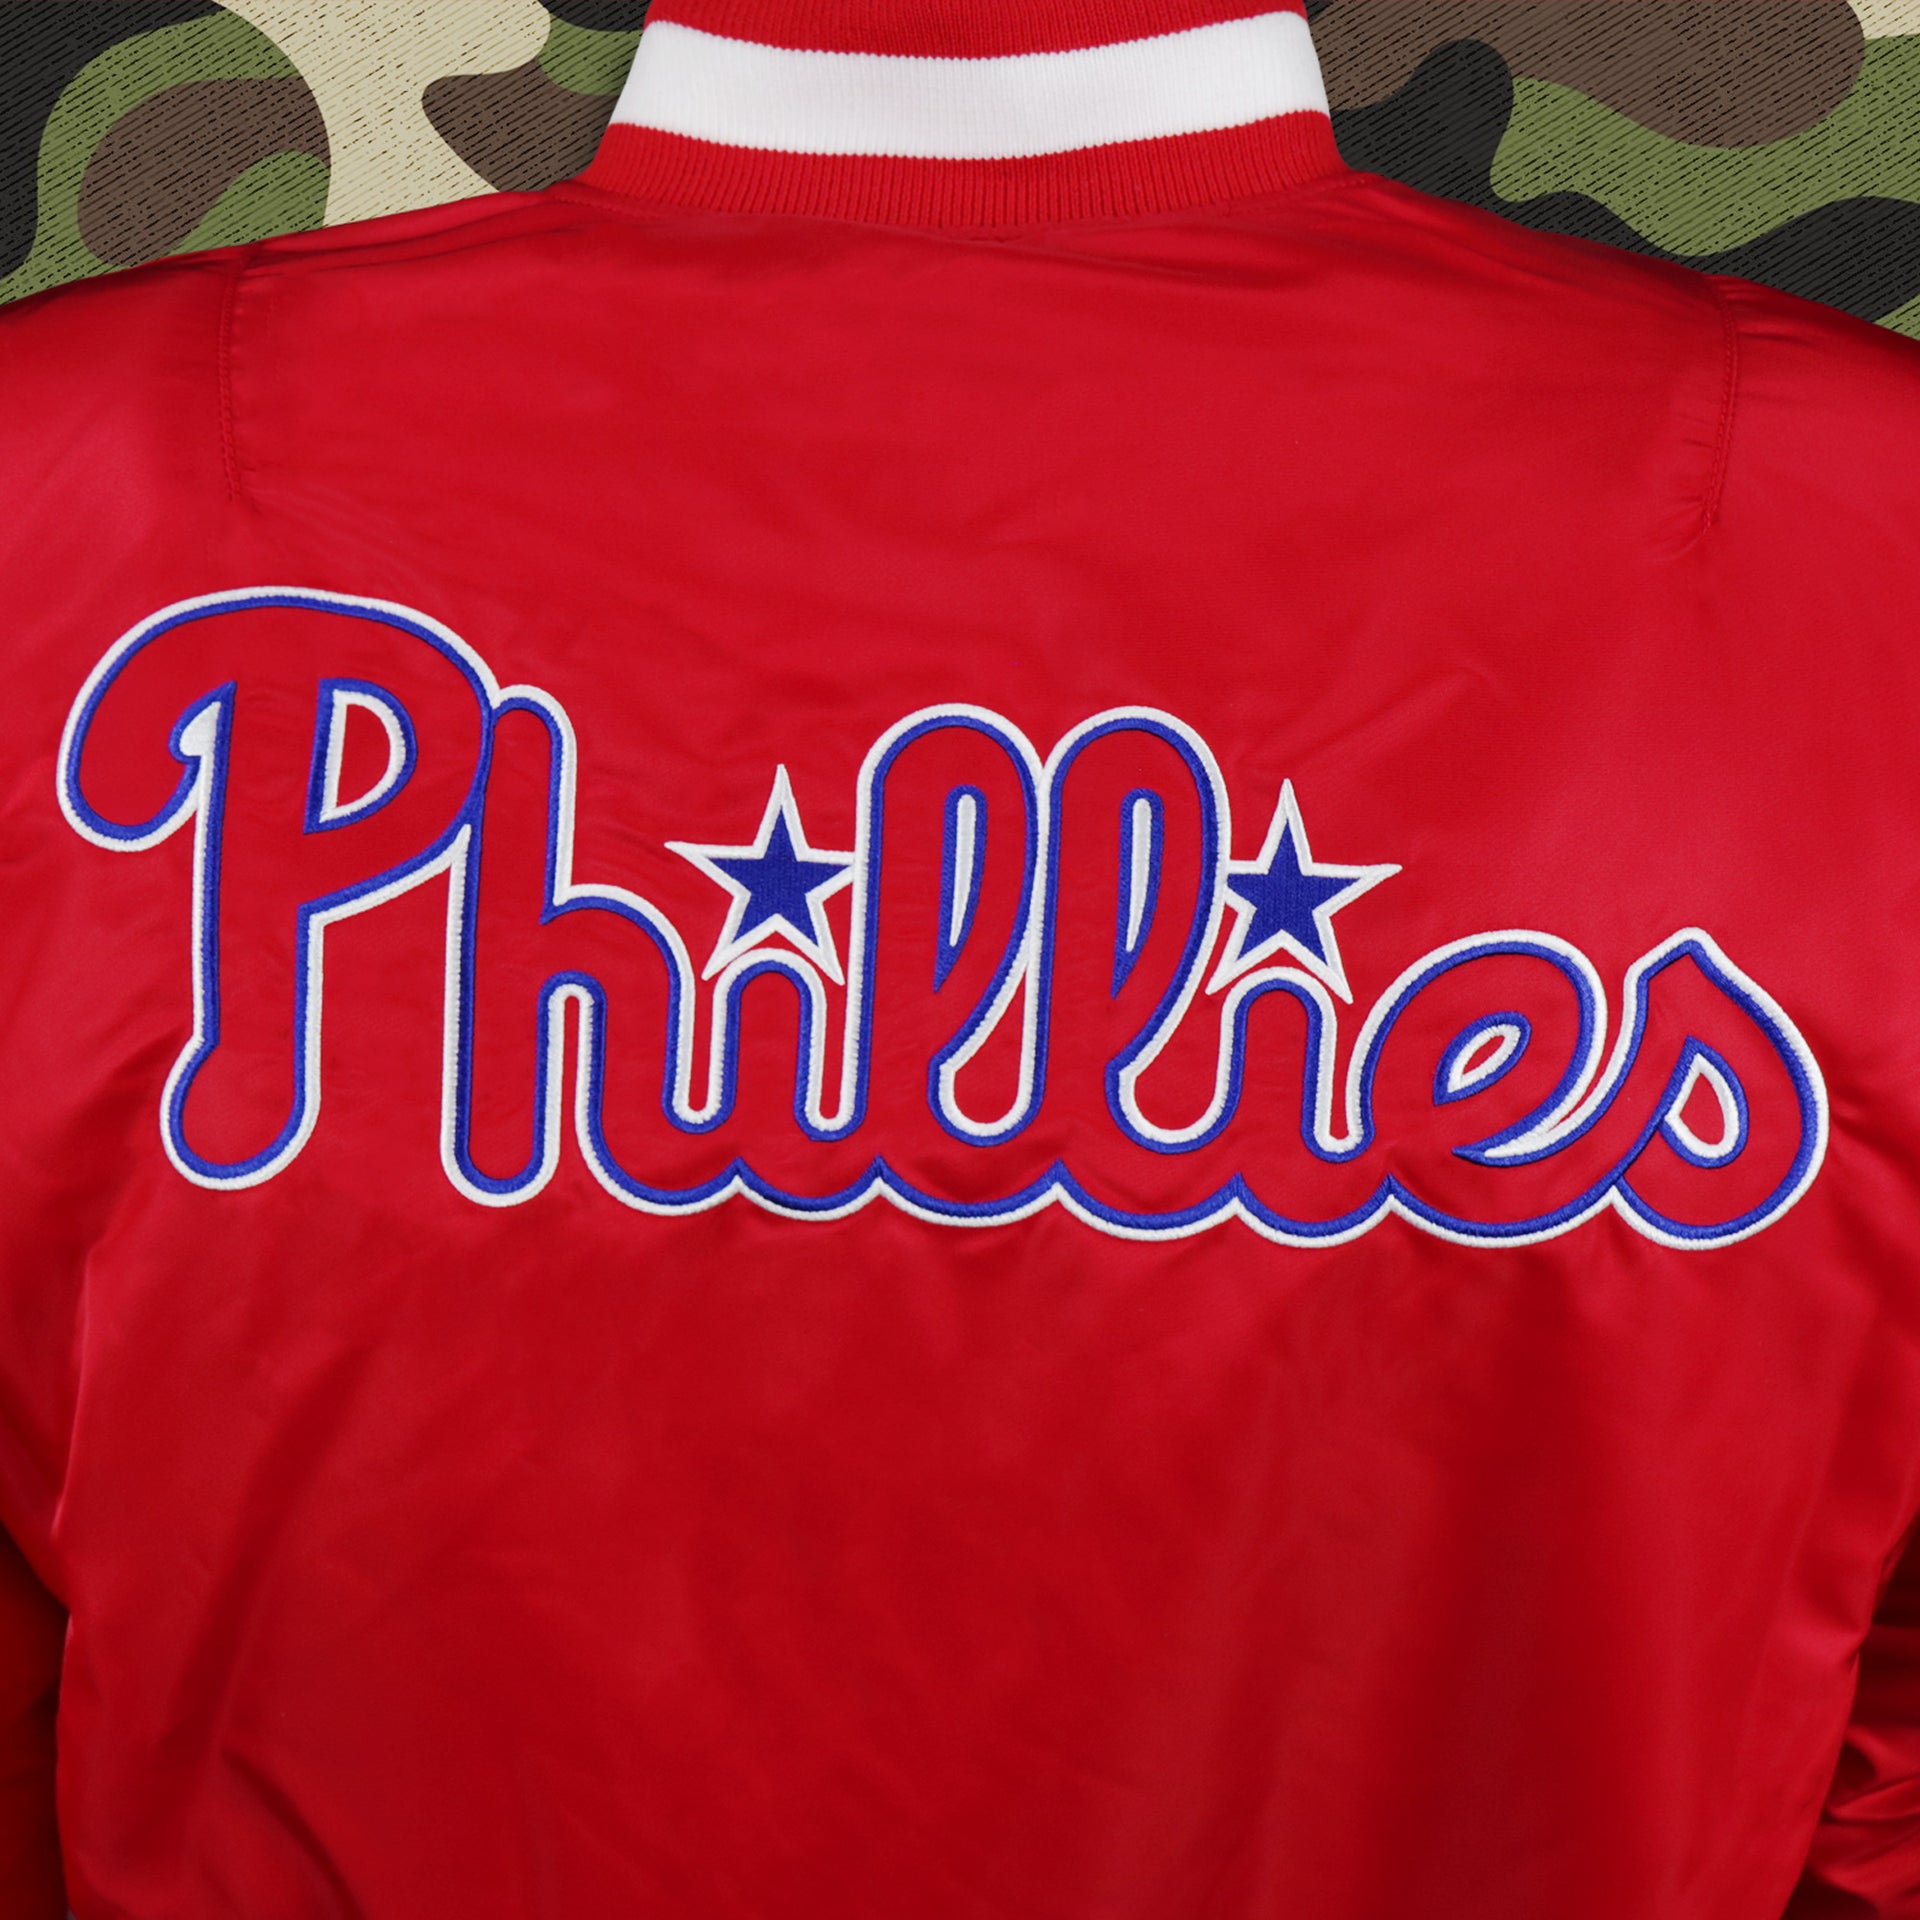 The Phillies Wordmark Logo on the Philadelphia Phillies MLB Patch Alpha Industries Reversible Bomber Jacket With Camo Liner | Red Bomber Jacket